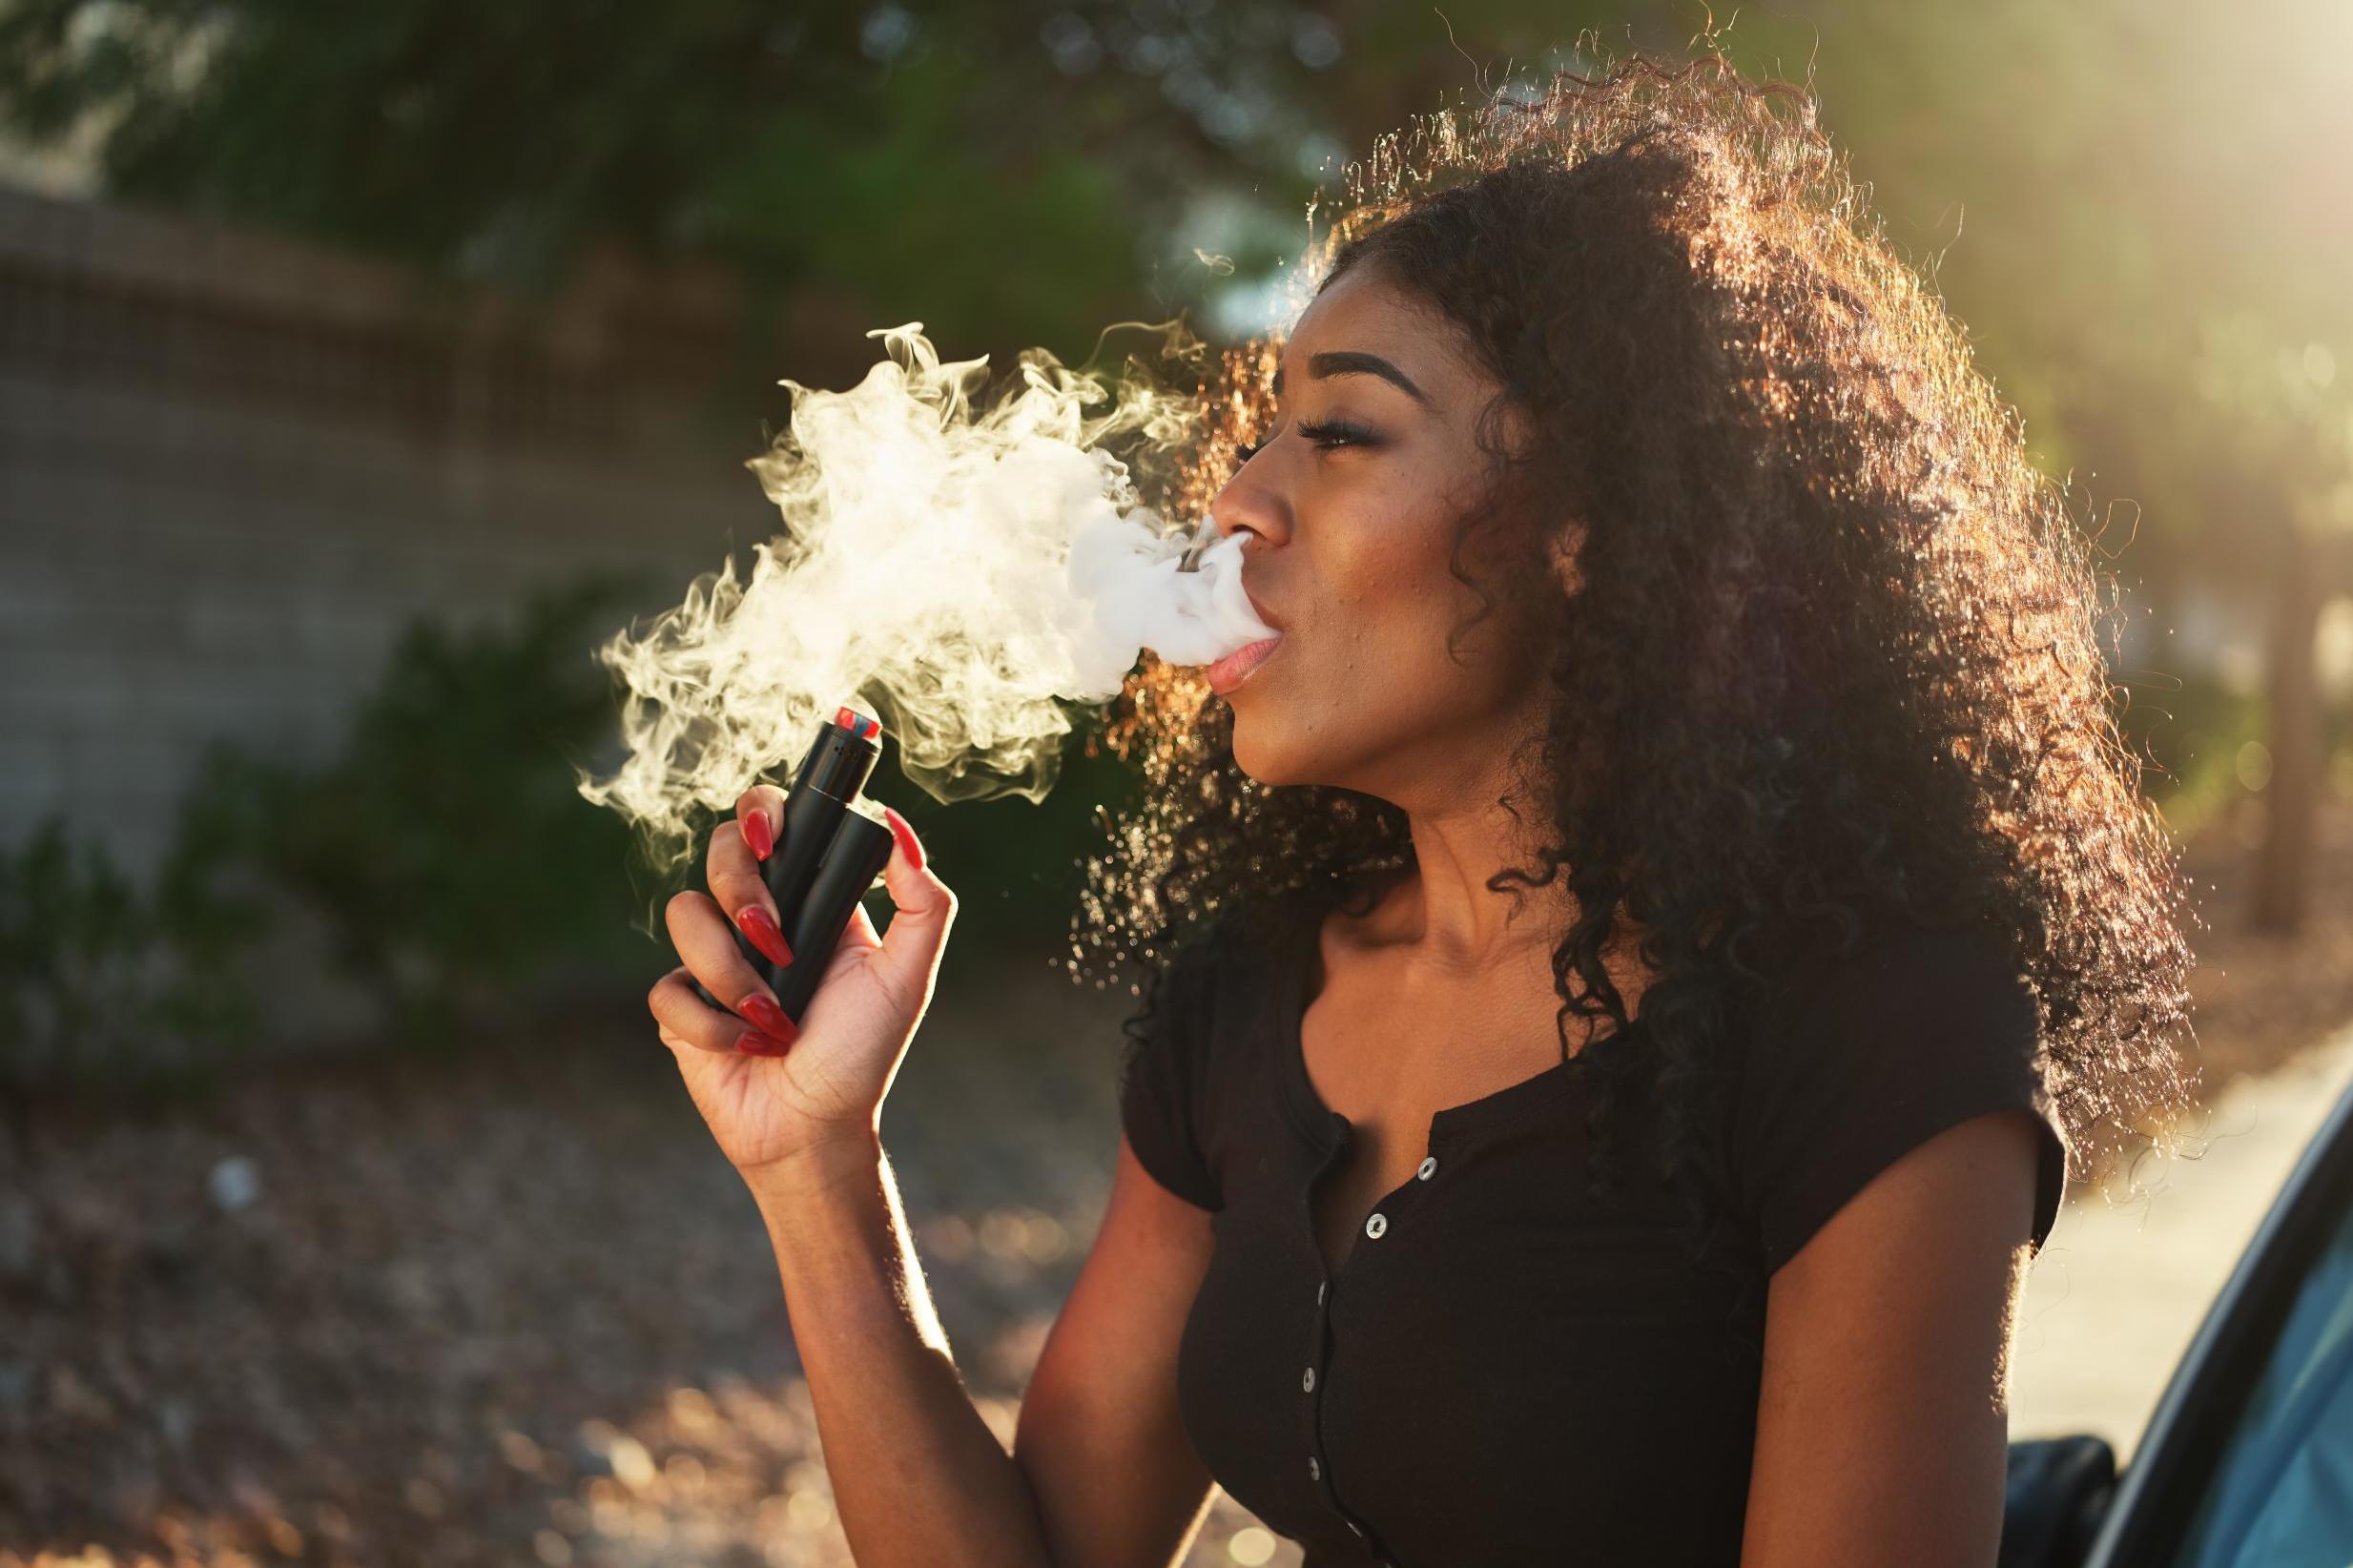 Severe Health Warnings On E Cigarettes May Stop Smokers From Switching To Vaping The